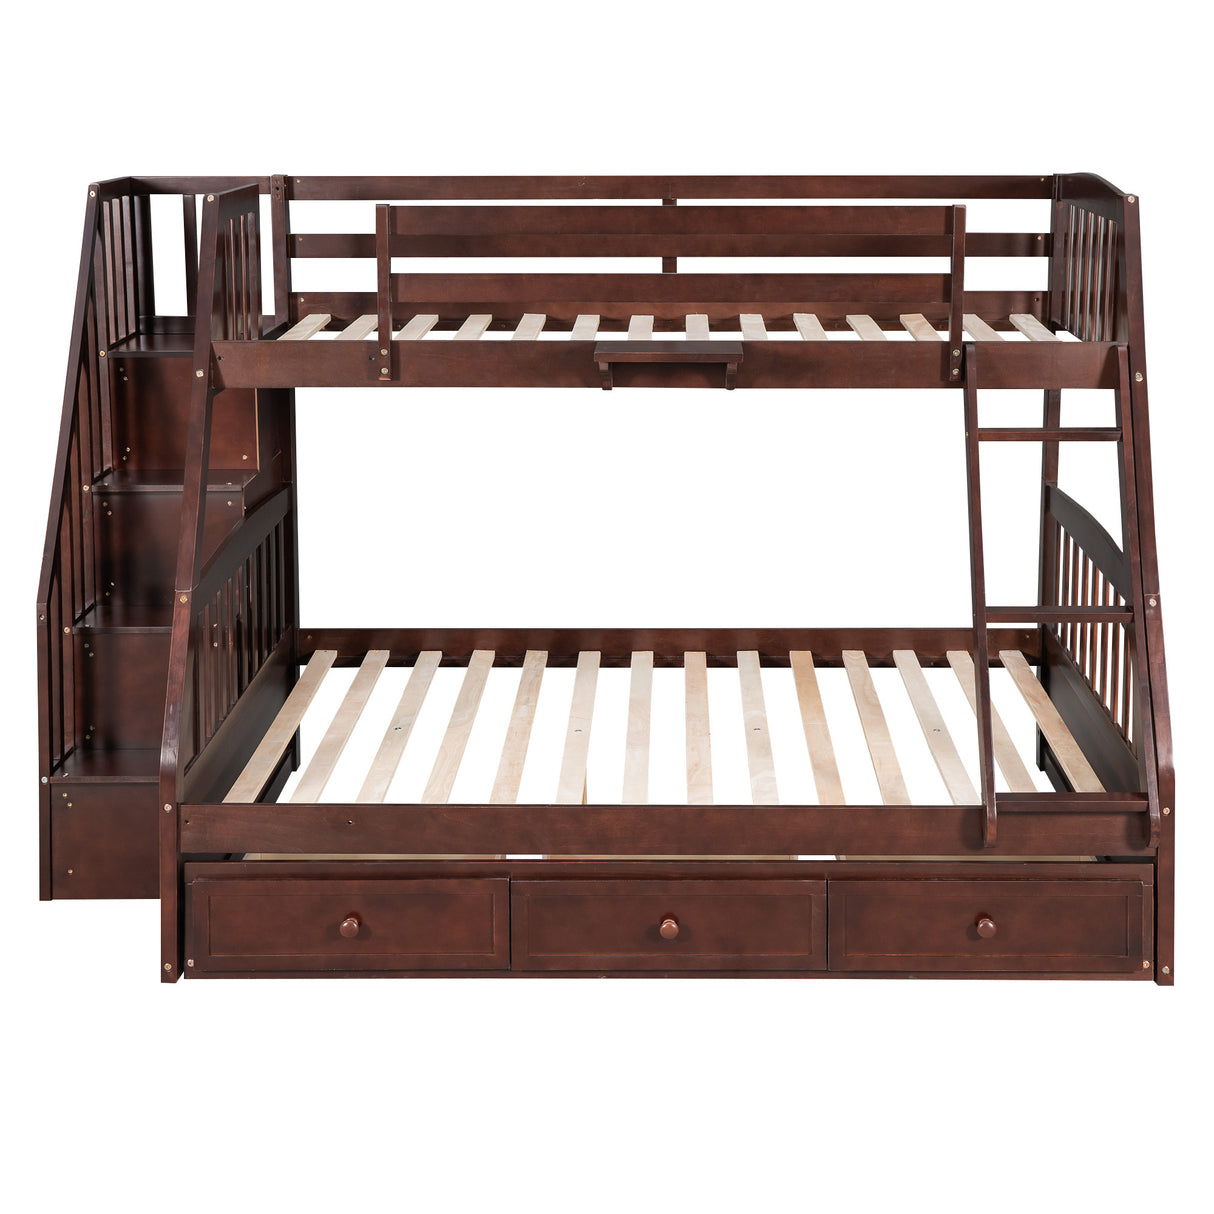 Twin-Over-Full Bunk Bed with Drawers，Ladder and Storage Staircase, Espresso - Home Elegance USA